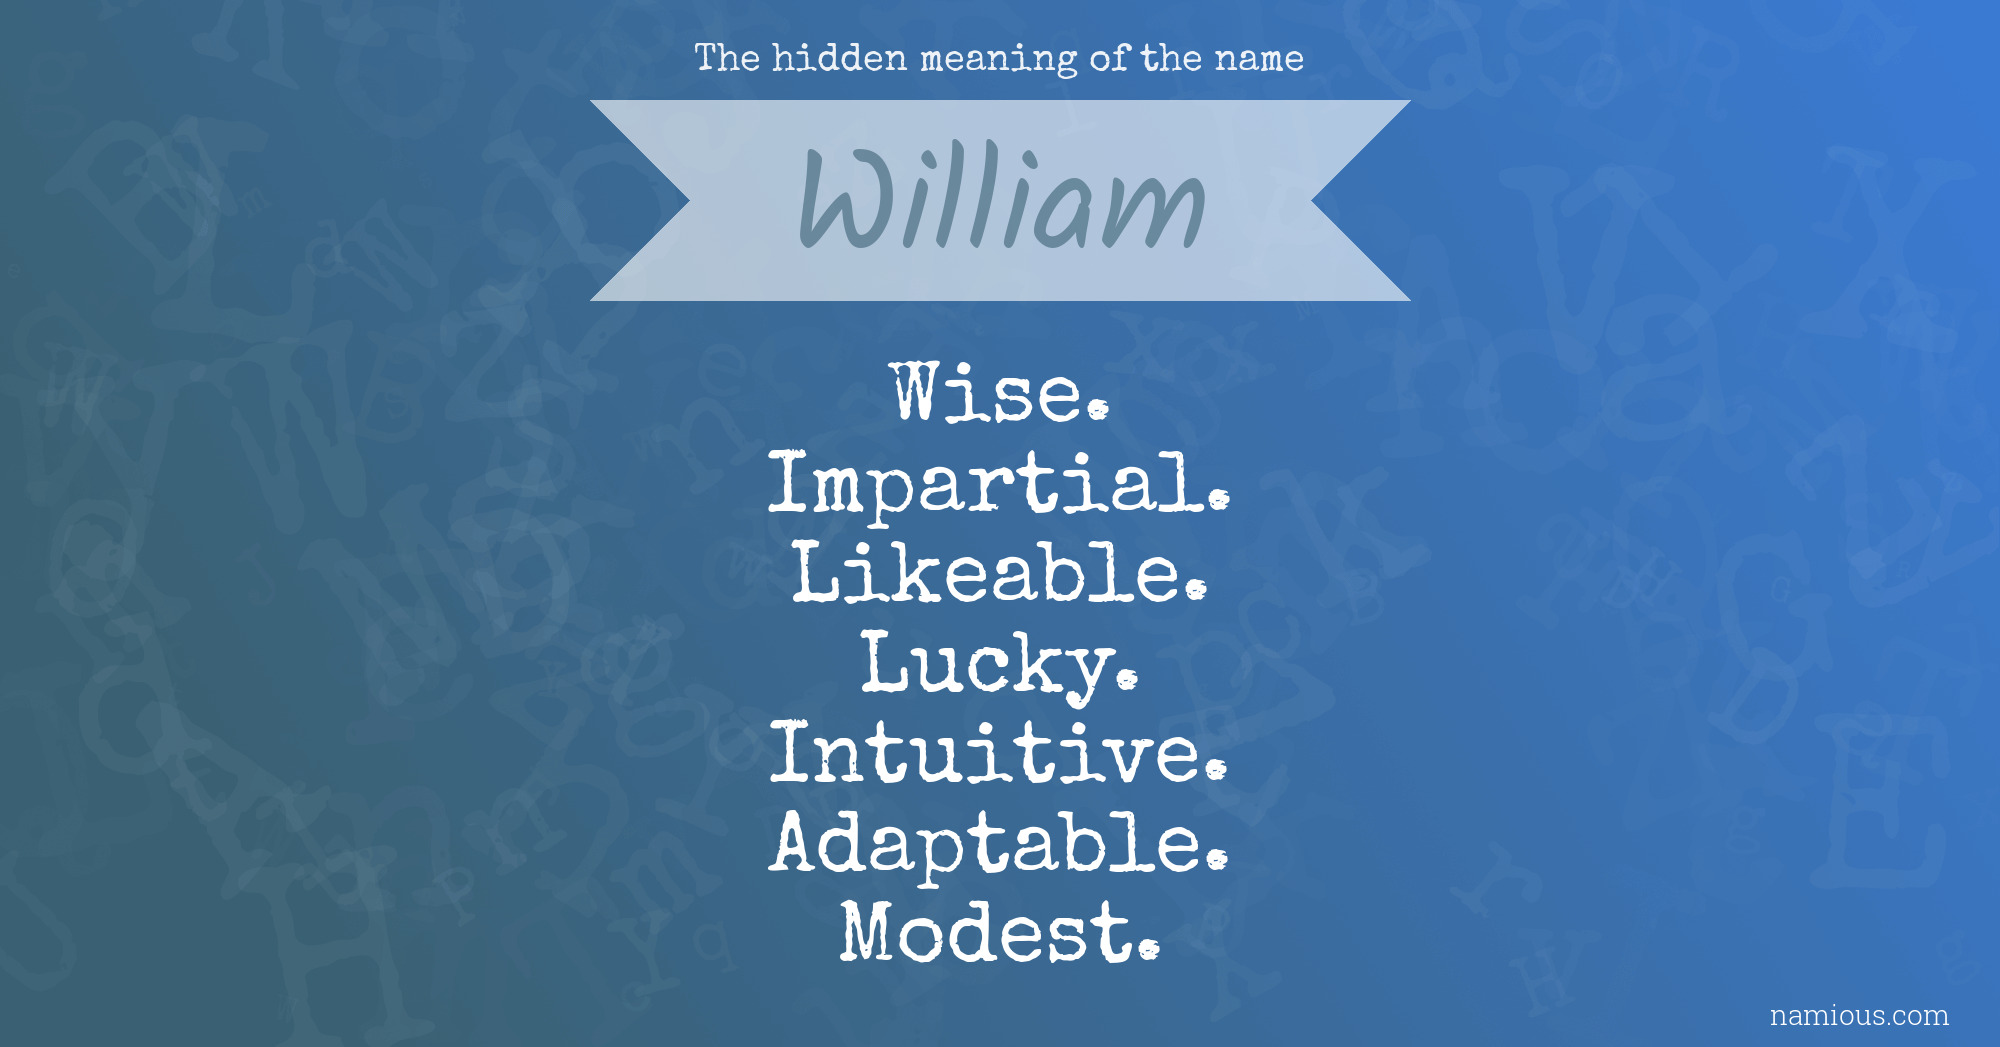 The hidden meaning of the name William